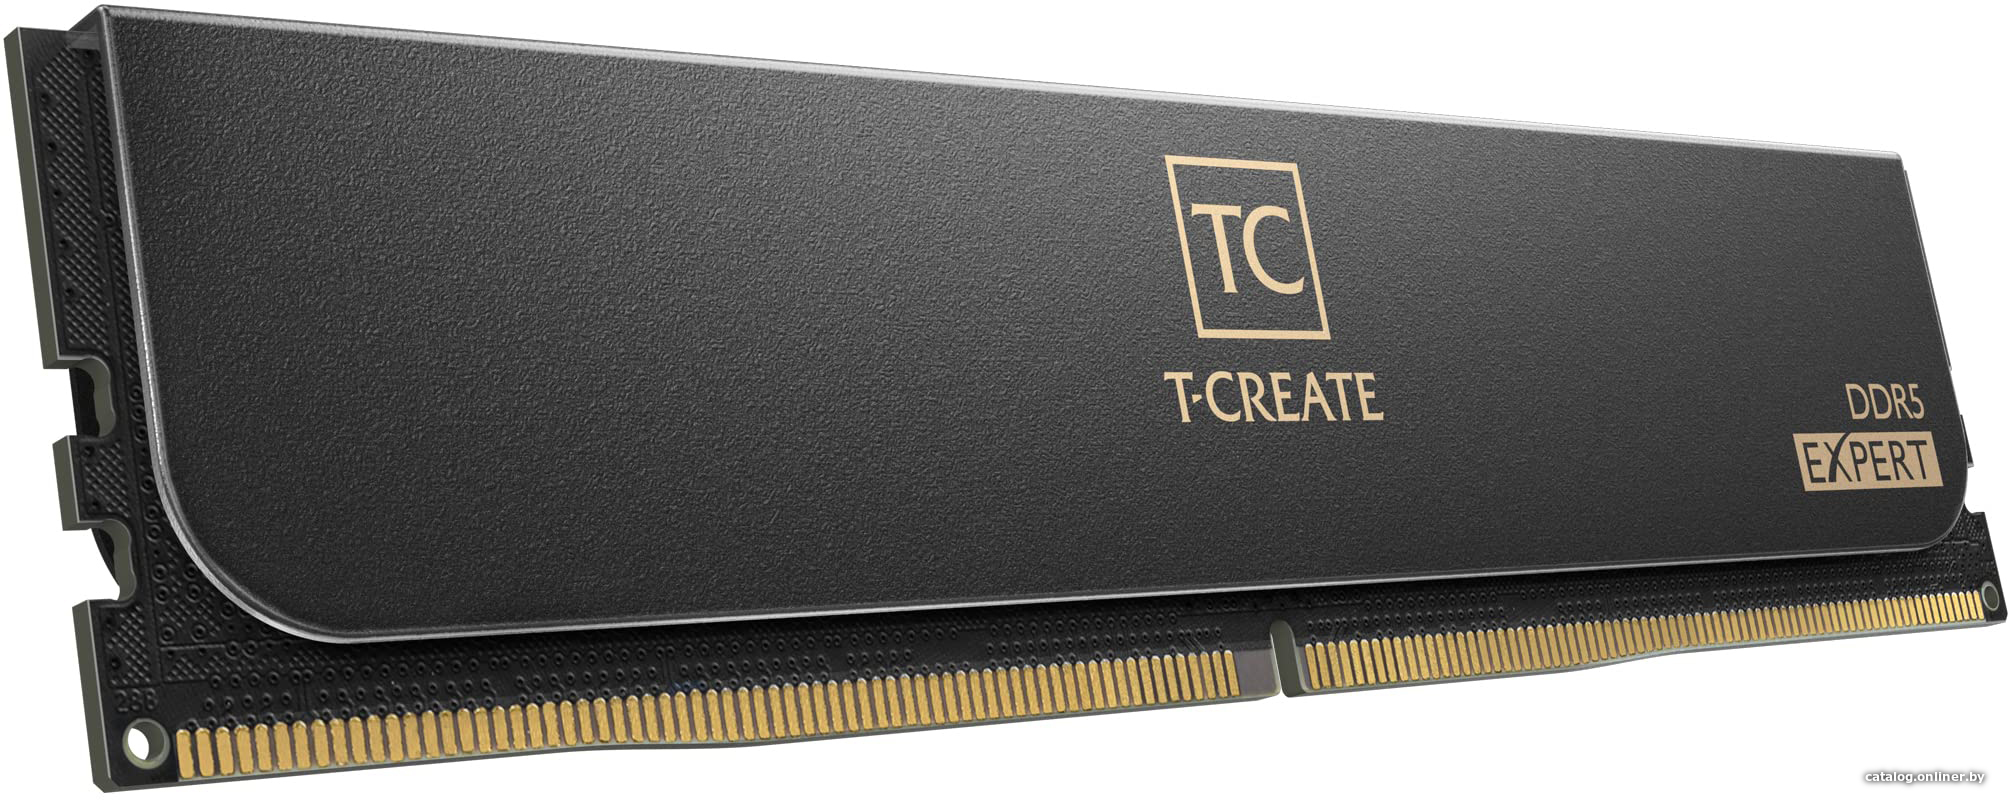 Ctced532g6000hc38adc01. TEAMGROUP T-create Expert 32gb (2x16gb) 6000mhz cl30 (30-36-36-76) 1.35v Black (ctced532g6000hc30dc0). T create ddr5. Team Group t-create Expert ddr5 6000mhz c38 a-die. Team group ddr5 2x16gb 6000mhz